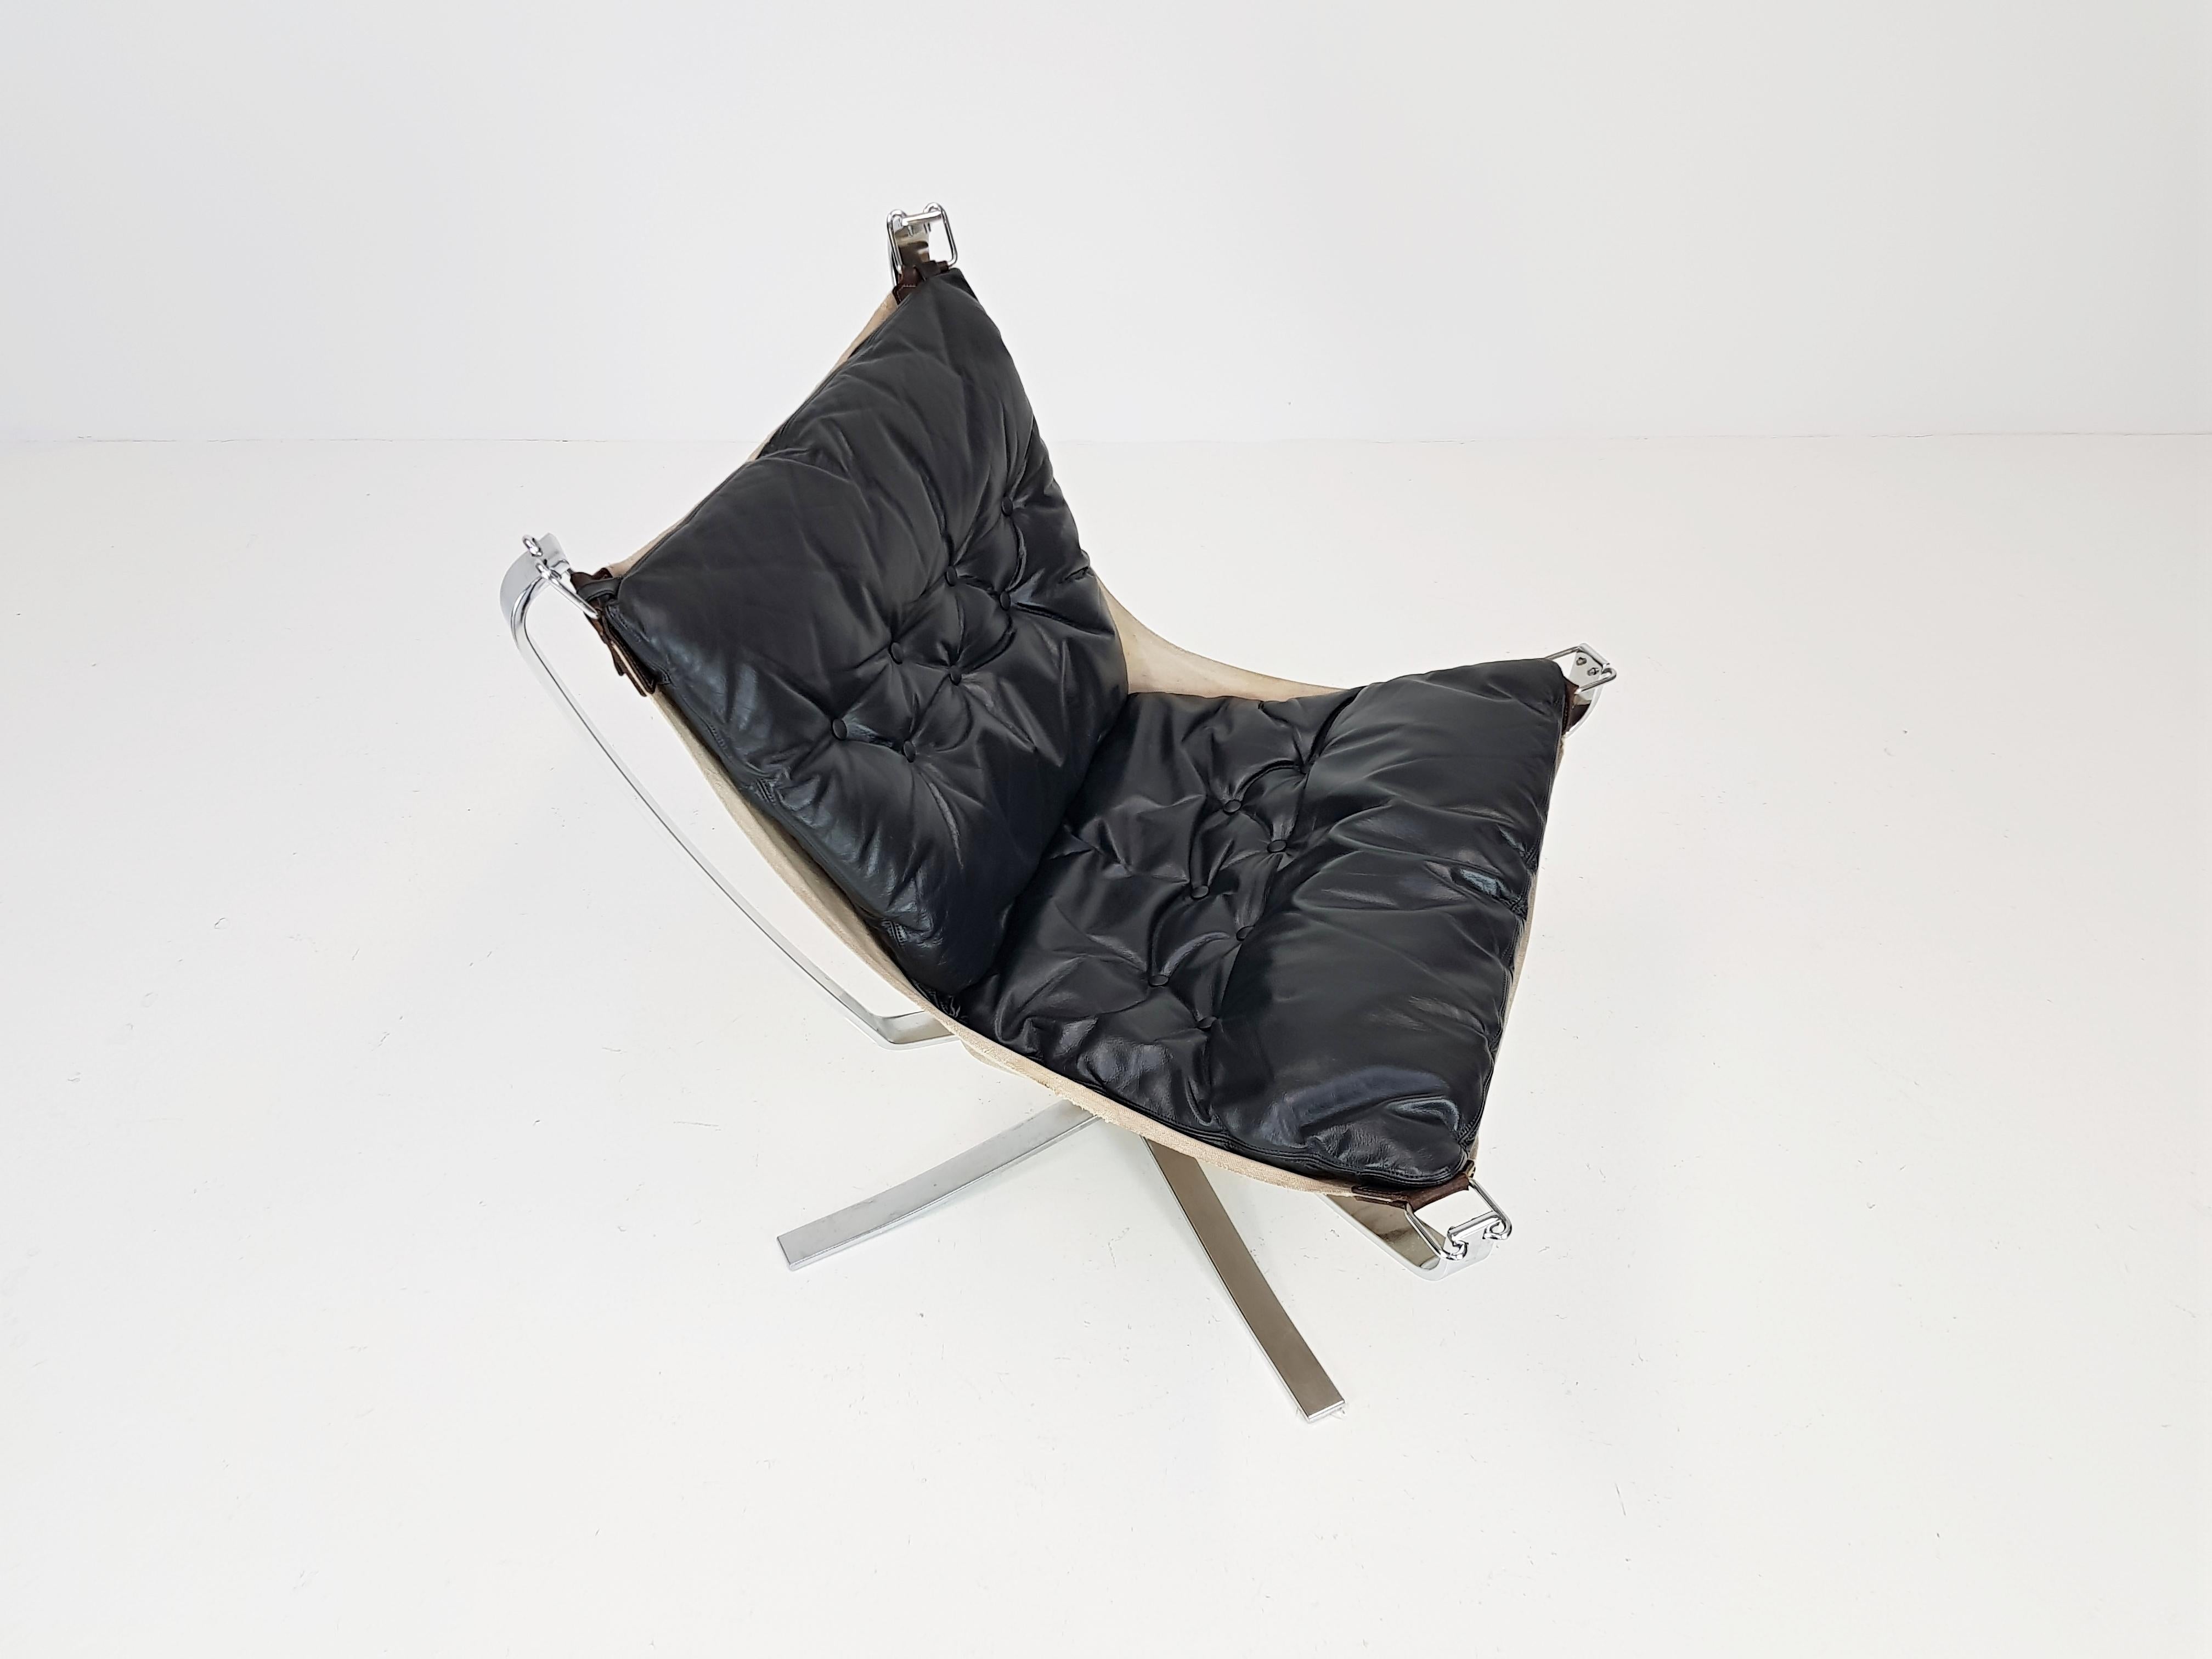 Norwegian Chrome Based Low-Backed X-Framed Sigurd Ressell Designed 1970s Falcon Chair